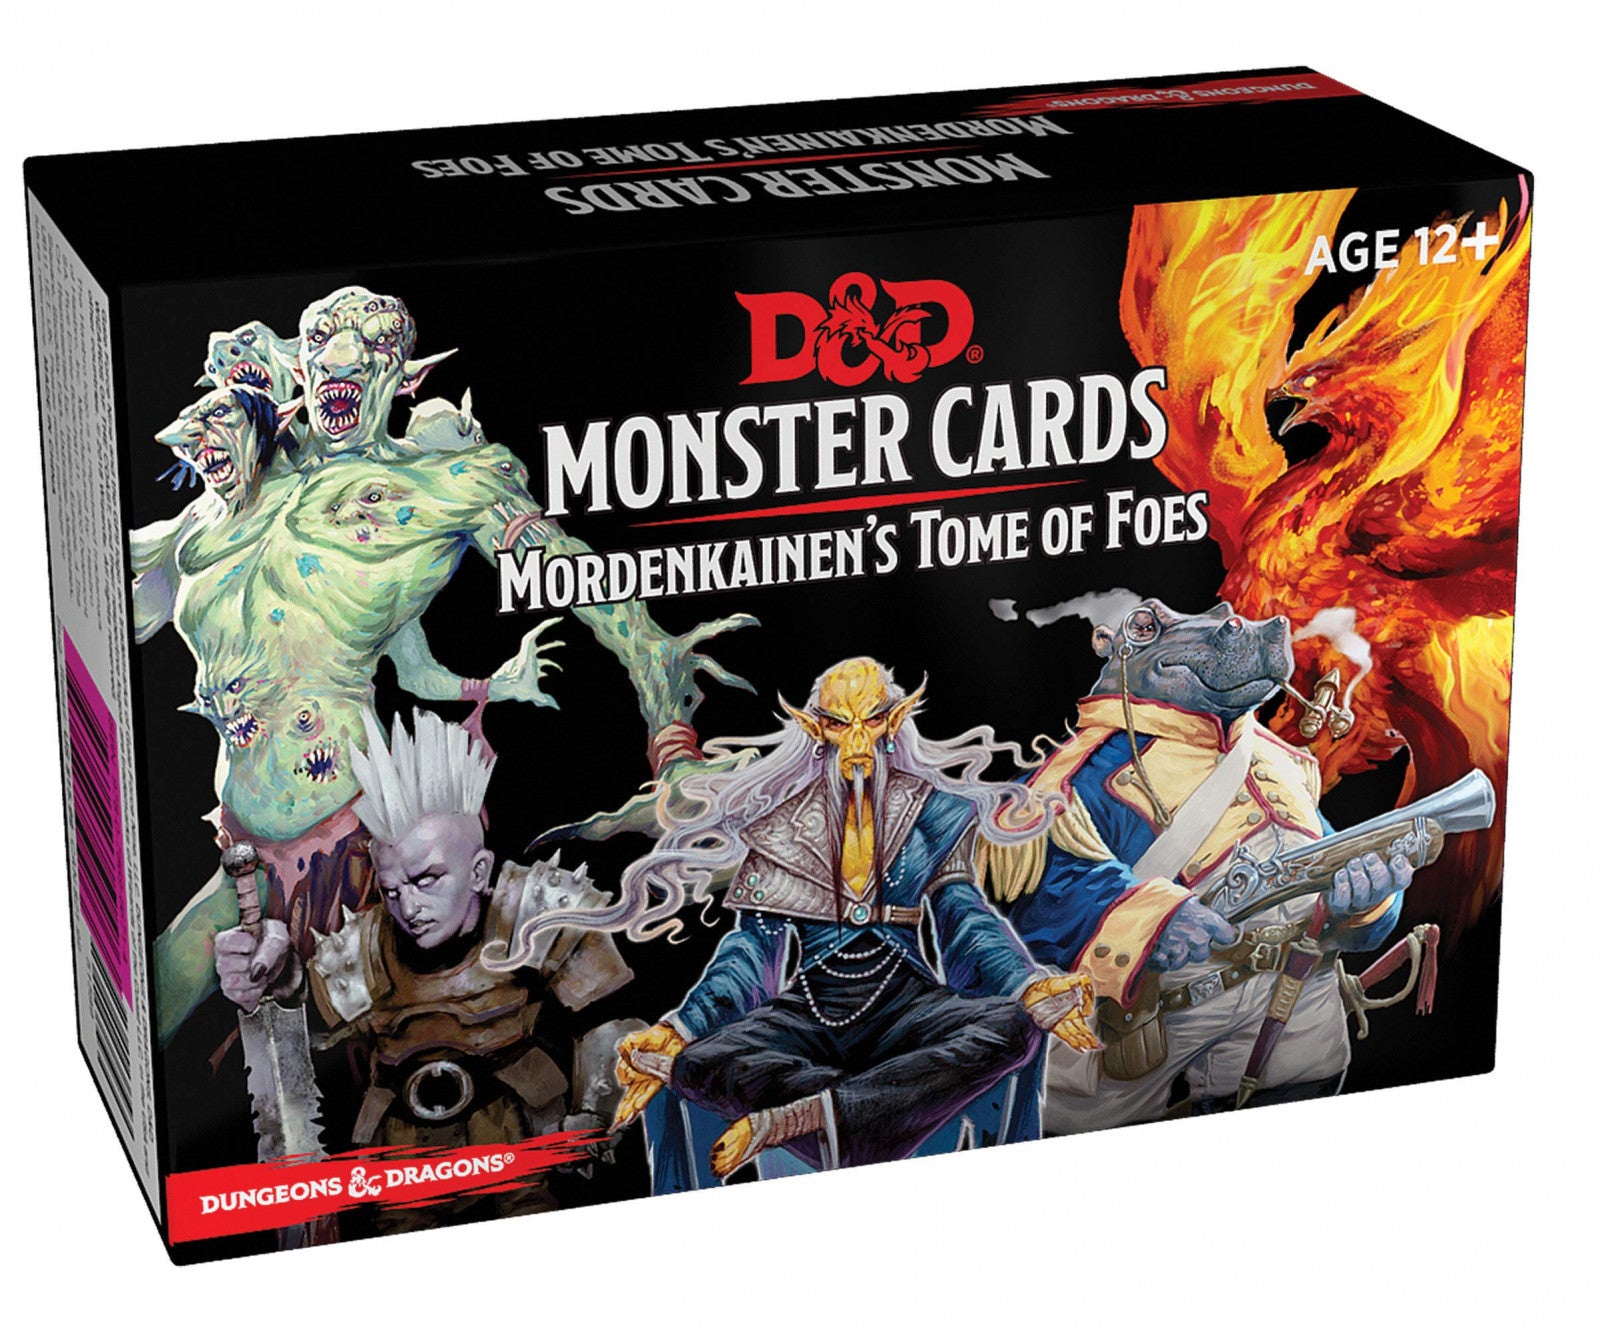 D&D Dungeons & Dragons Spellbook Cards Monster Cards Mordenkainens Tome of Foes